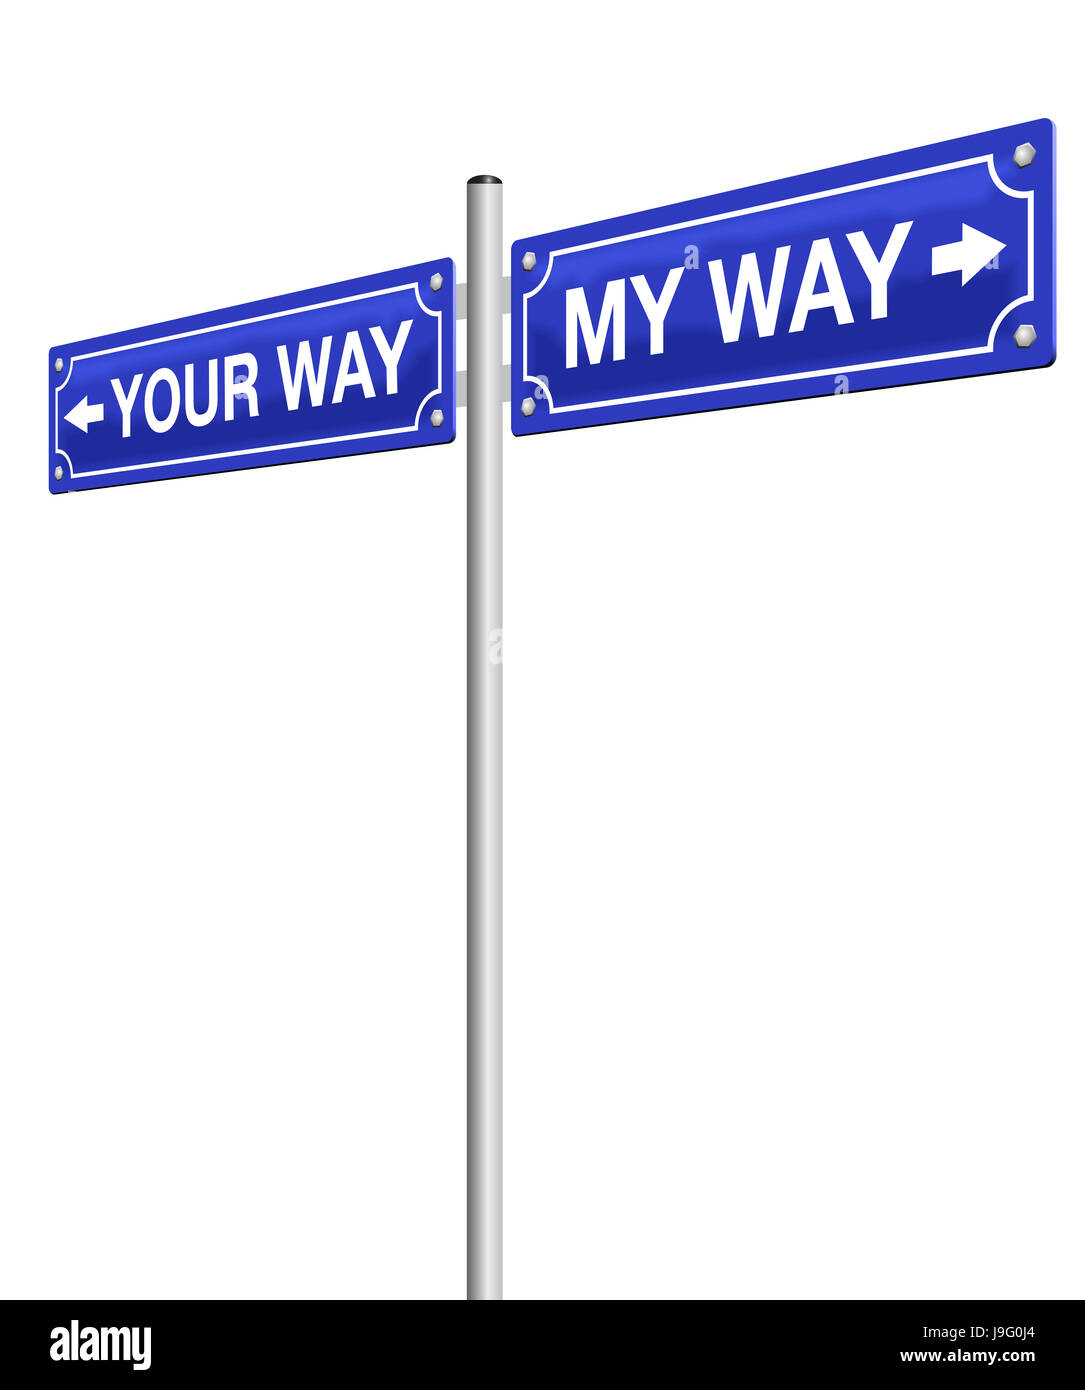 My way - your way - road sign, symbolic for divorce, farewell and going separate ways, different routes or opposite directions. Stock Photo